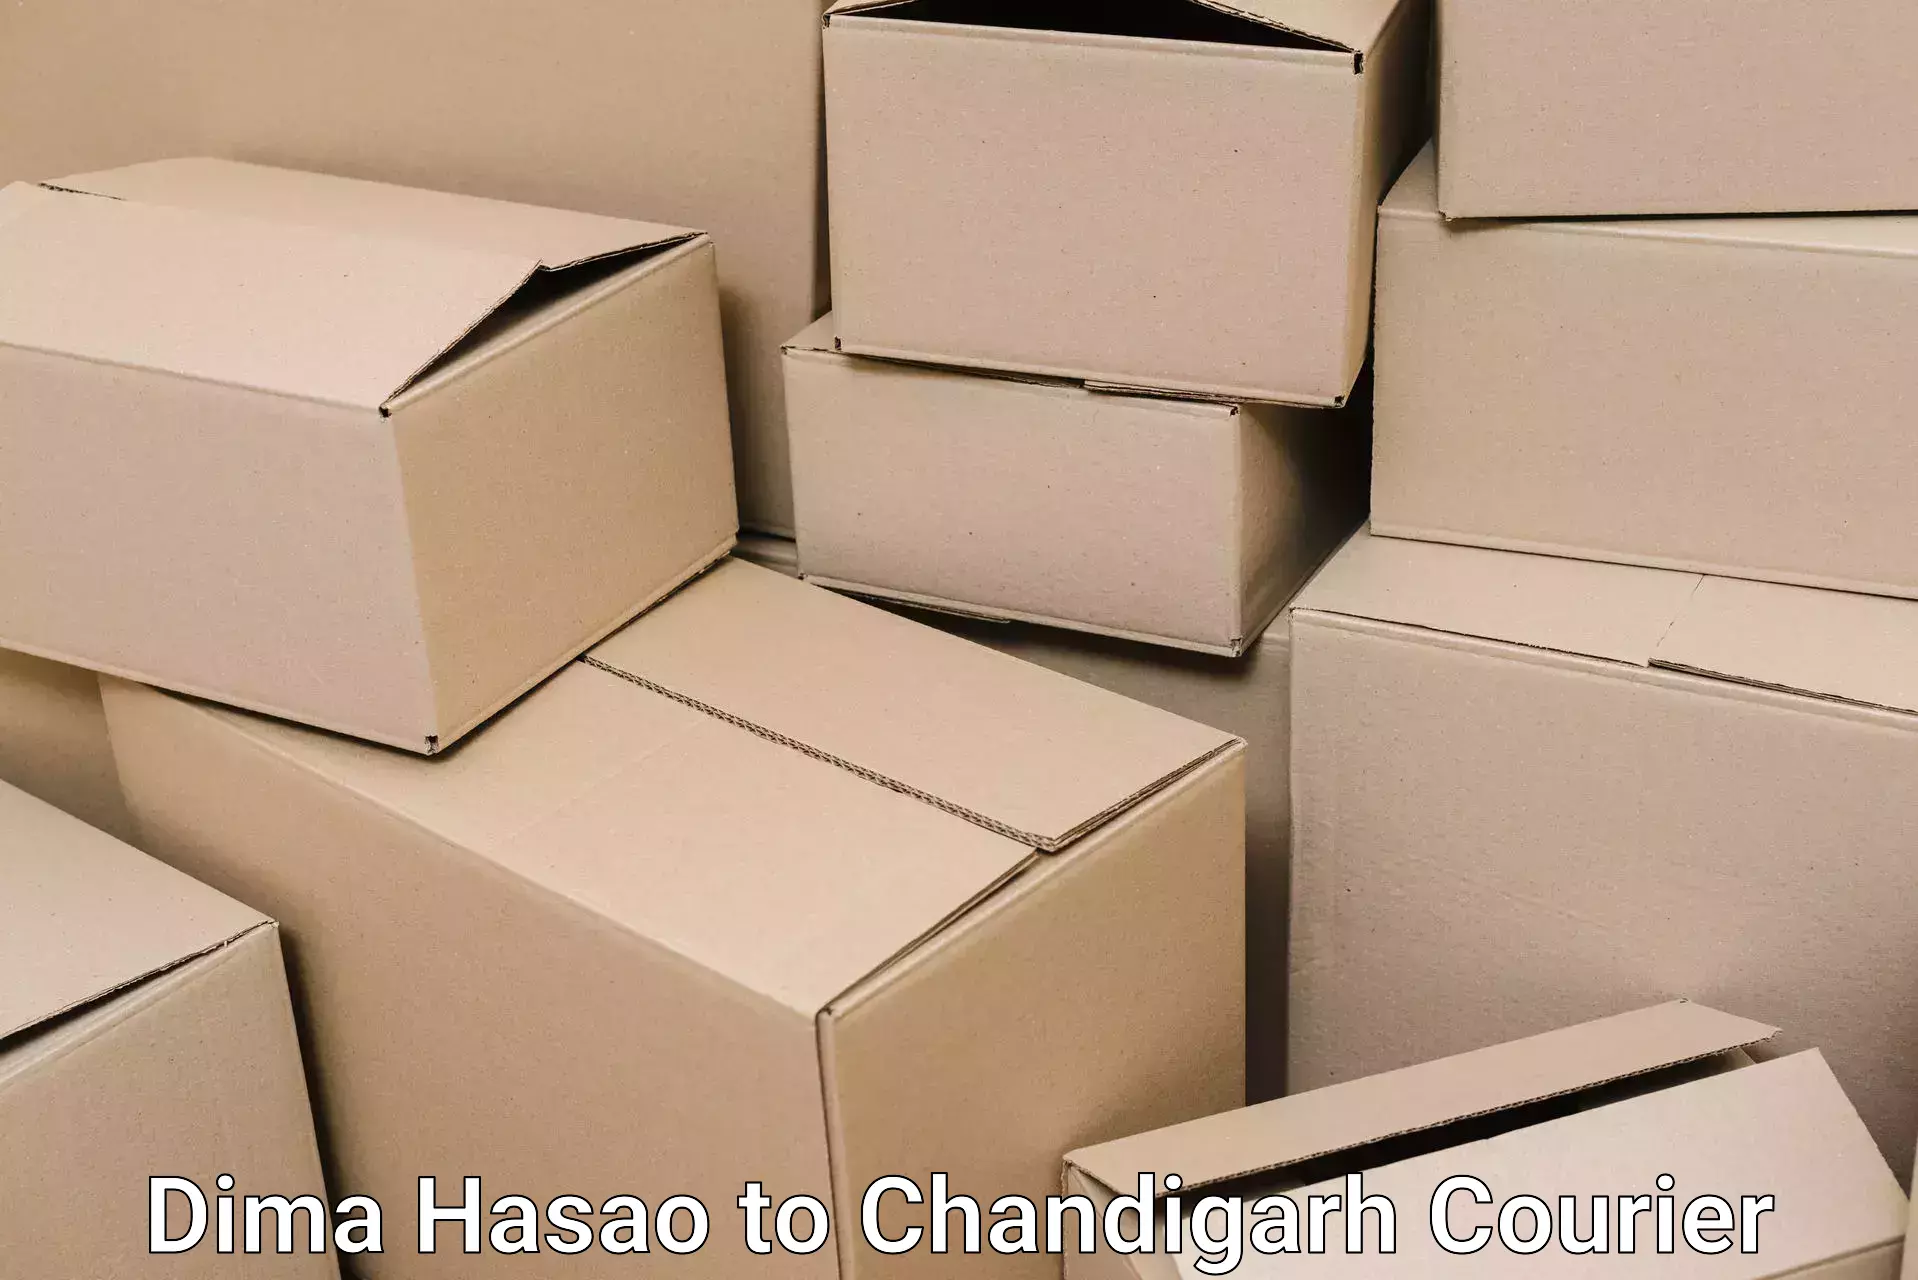 Furniture moving specialists Dima Hasao to Chandigarh